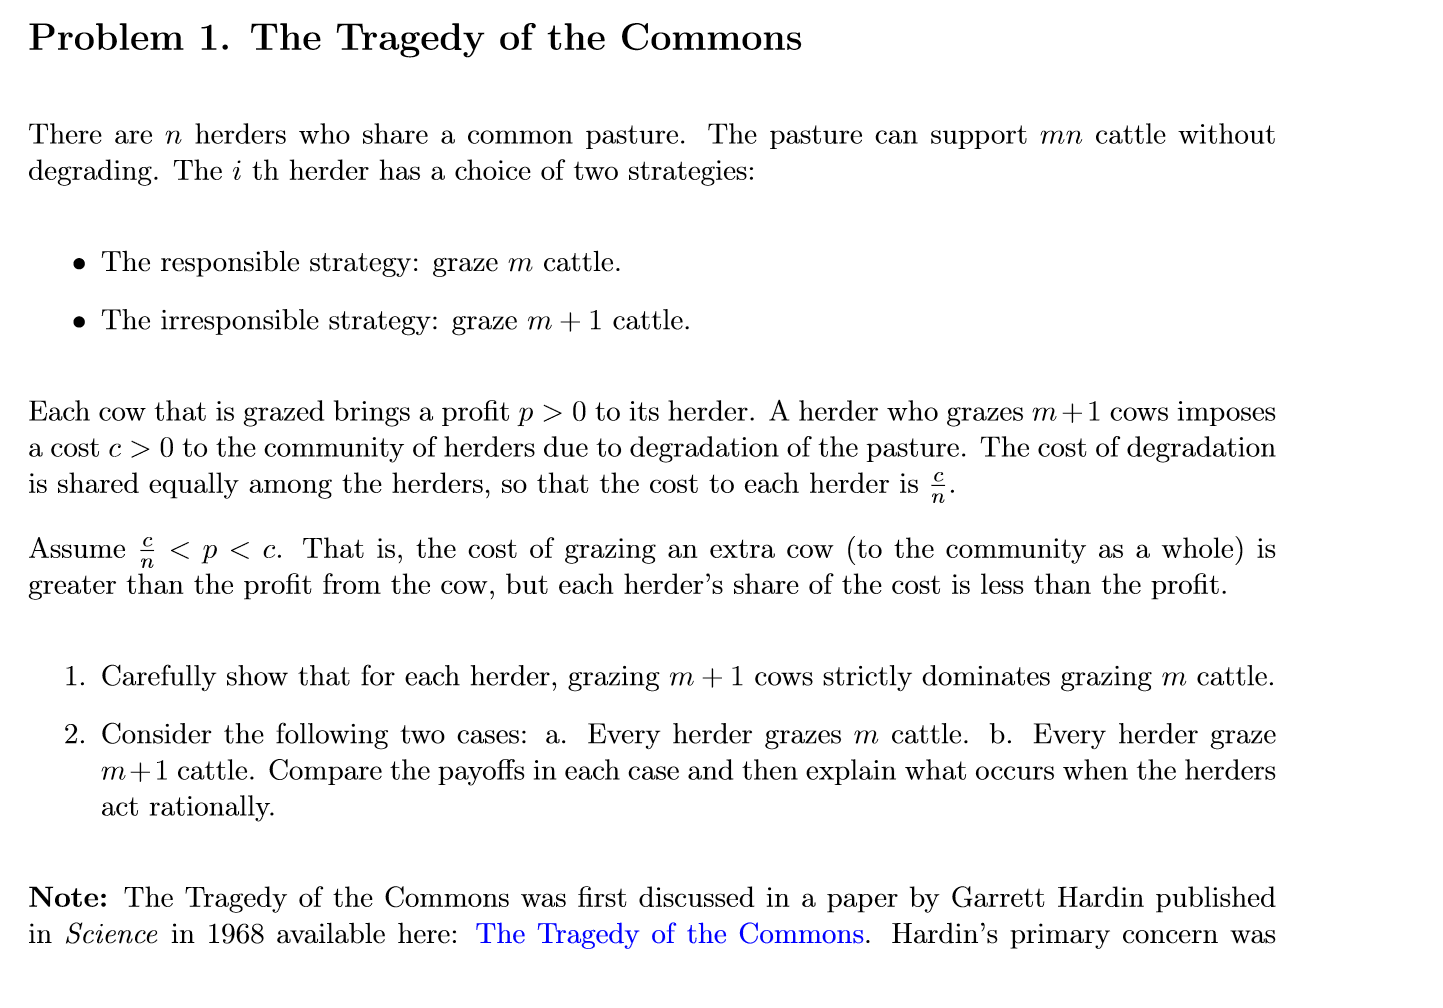 tragedy of the commons hardin